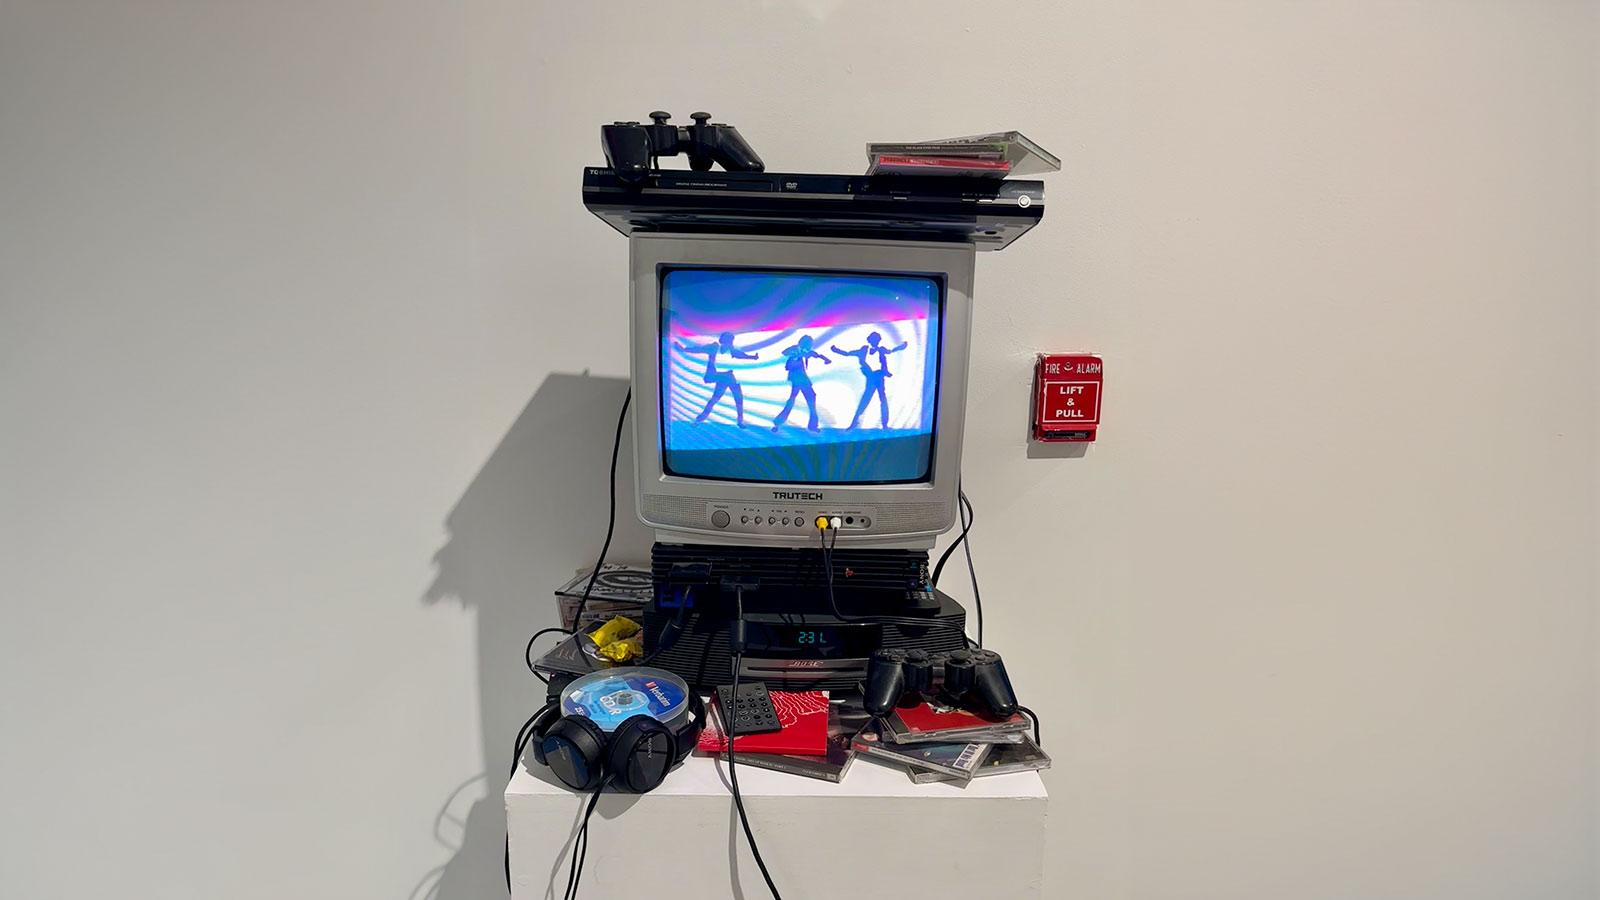 Television artwork called Chartreusetaxi by student Jordan Cann on display in the Corporate Holiday Party: Senior Capstone Exhibition in the Pace University Art Gallery.